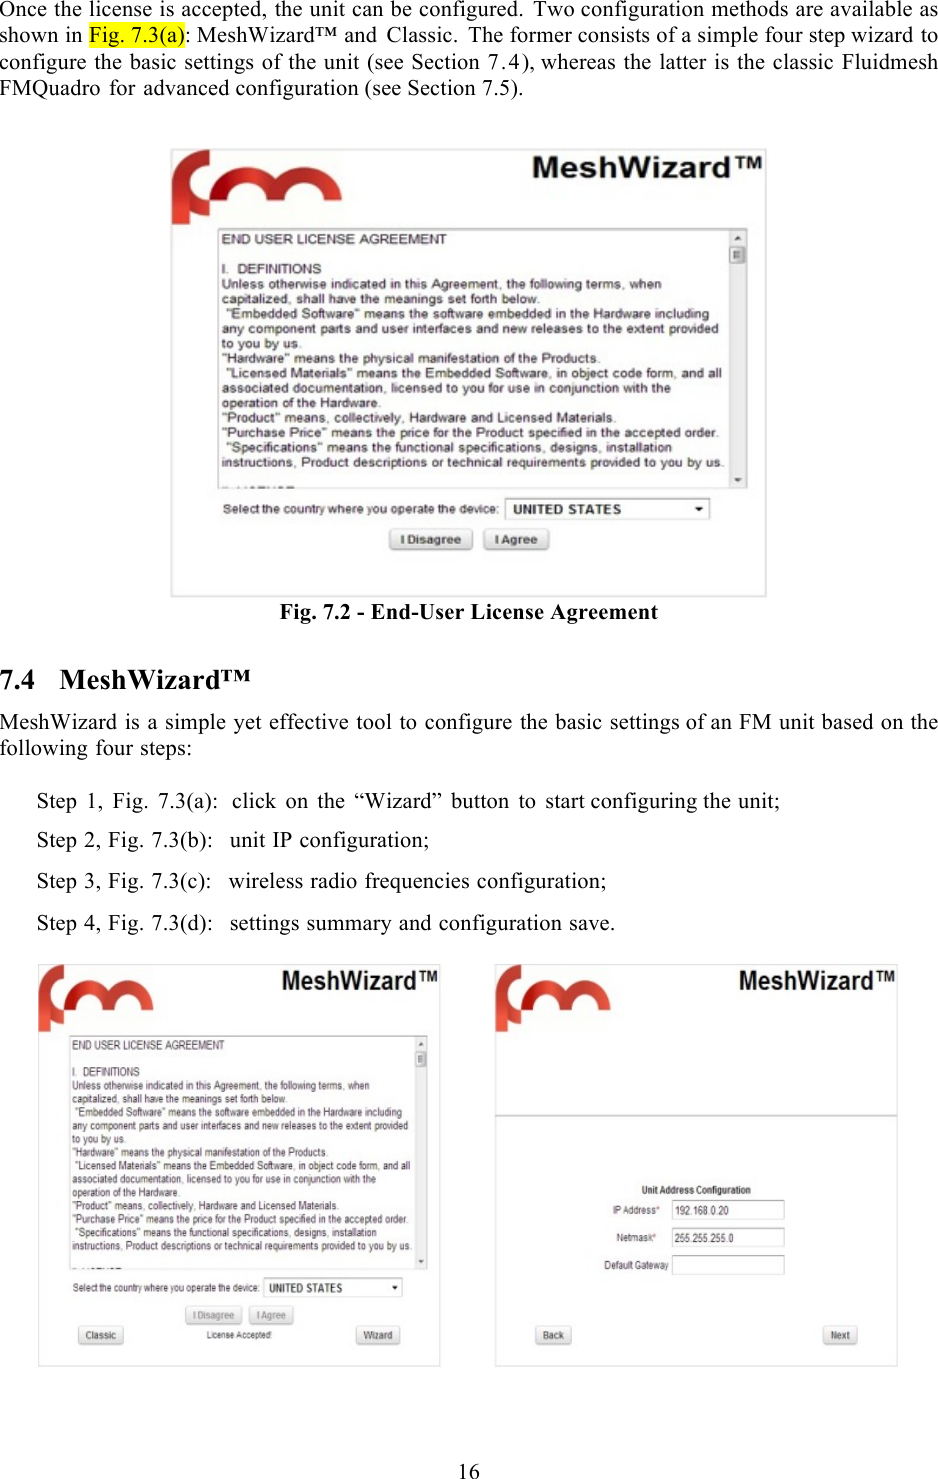  16   Once the license is accepted, the unit can be configured. Two configuration methods are available as shown in Fig. 7.3(a): MeshWizard™ and Classic. The former consists of a simple four step wizard to configure the basic settings of the unit (see Section 7.4), whereas the latter is the classic Fluidmesh FMQuadro for advanced configuration (see Section 7.5).    Fig. 7.2 - End-User License Agreement 7.4 MeshWizard™ MeshWizard is a simple yet effective tool to configure the basic settings of an FM unit based on the following four steps:  Step 1, Fig. 7.3(a):  click on the “Wizard” button to start configuring the unit;  Step 2, Fig. 7.3(b):  unit IP configuration;  Step 3, Fig. 7.3(c):  wireless radio frequencies configuration;  Step 4, Fig. 7.3(d):  settings summary and configuration save.     